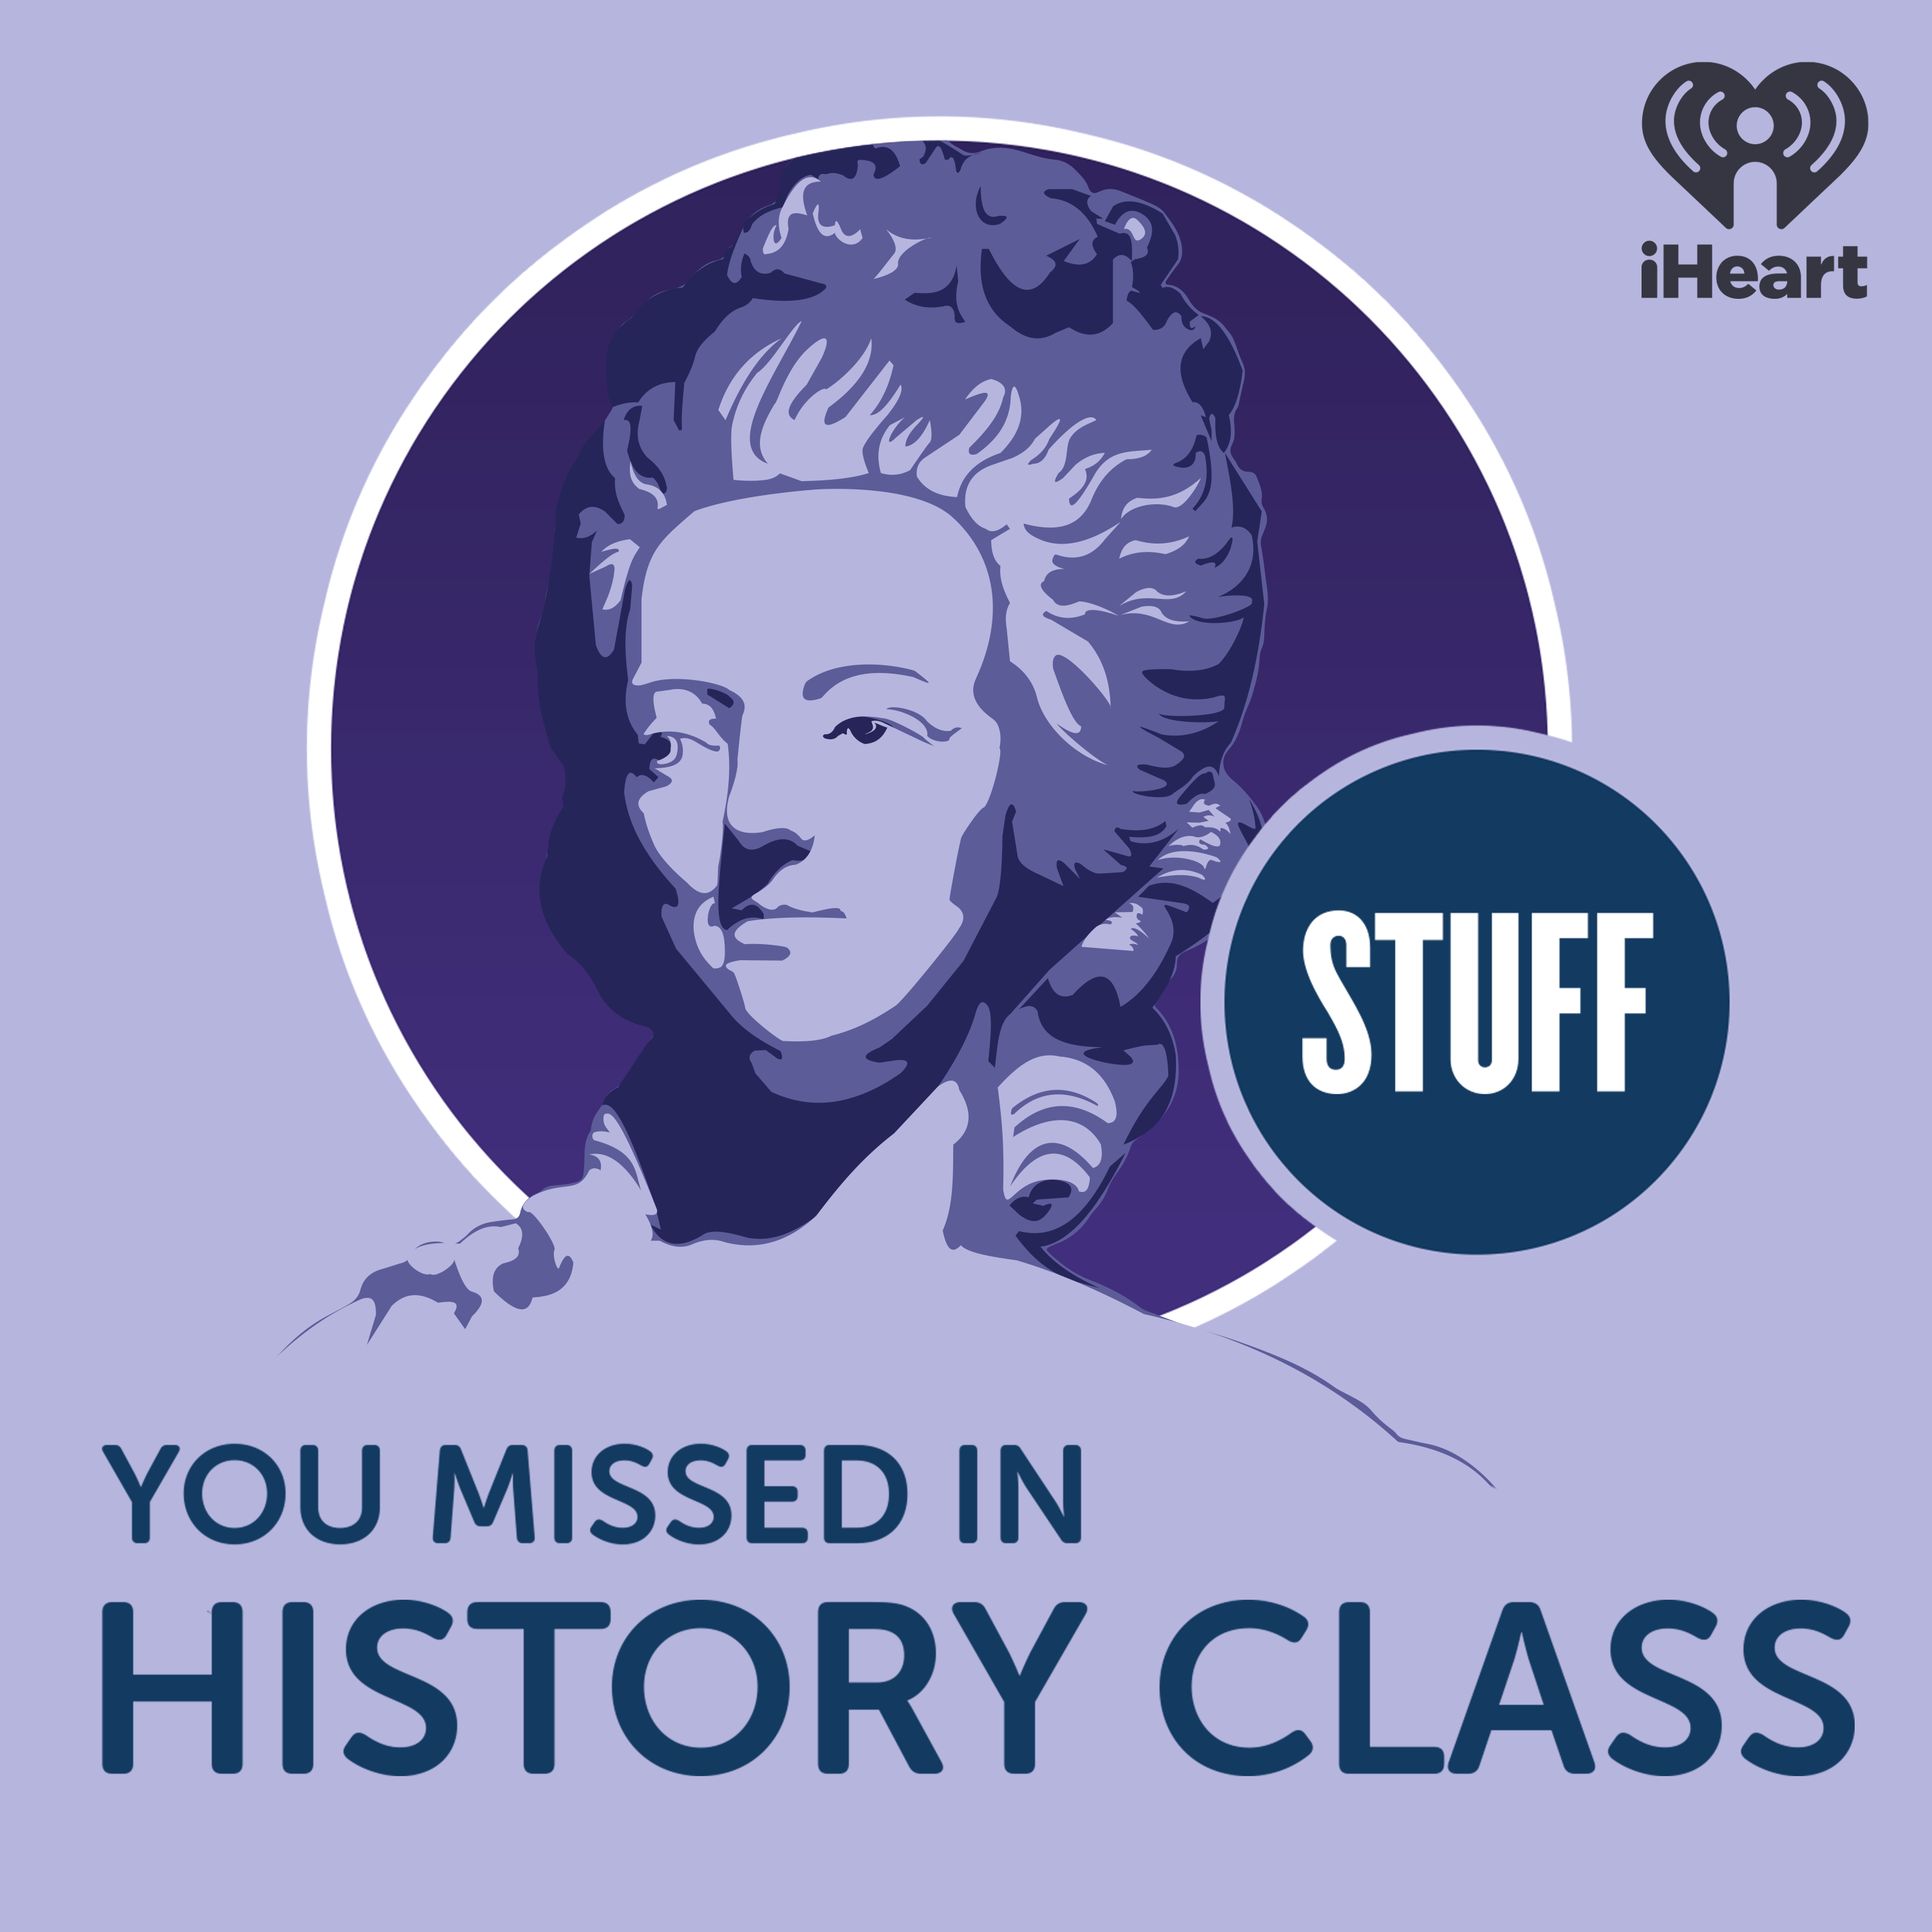 Who was America's first murderer?